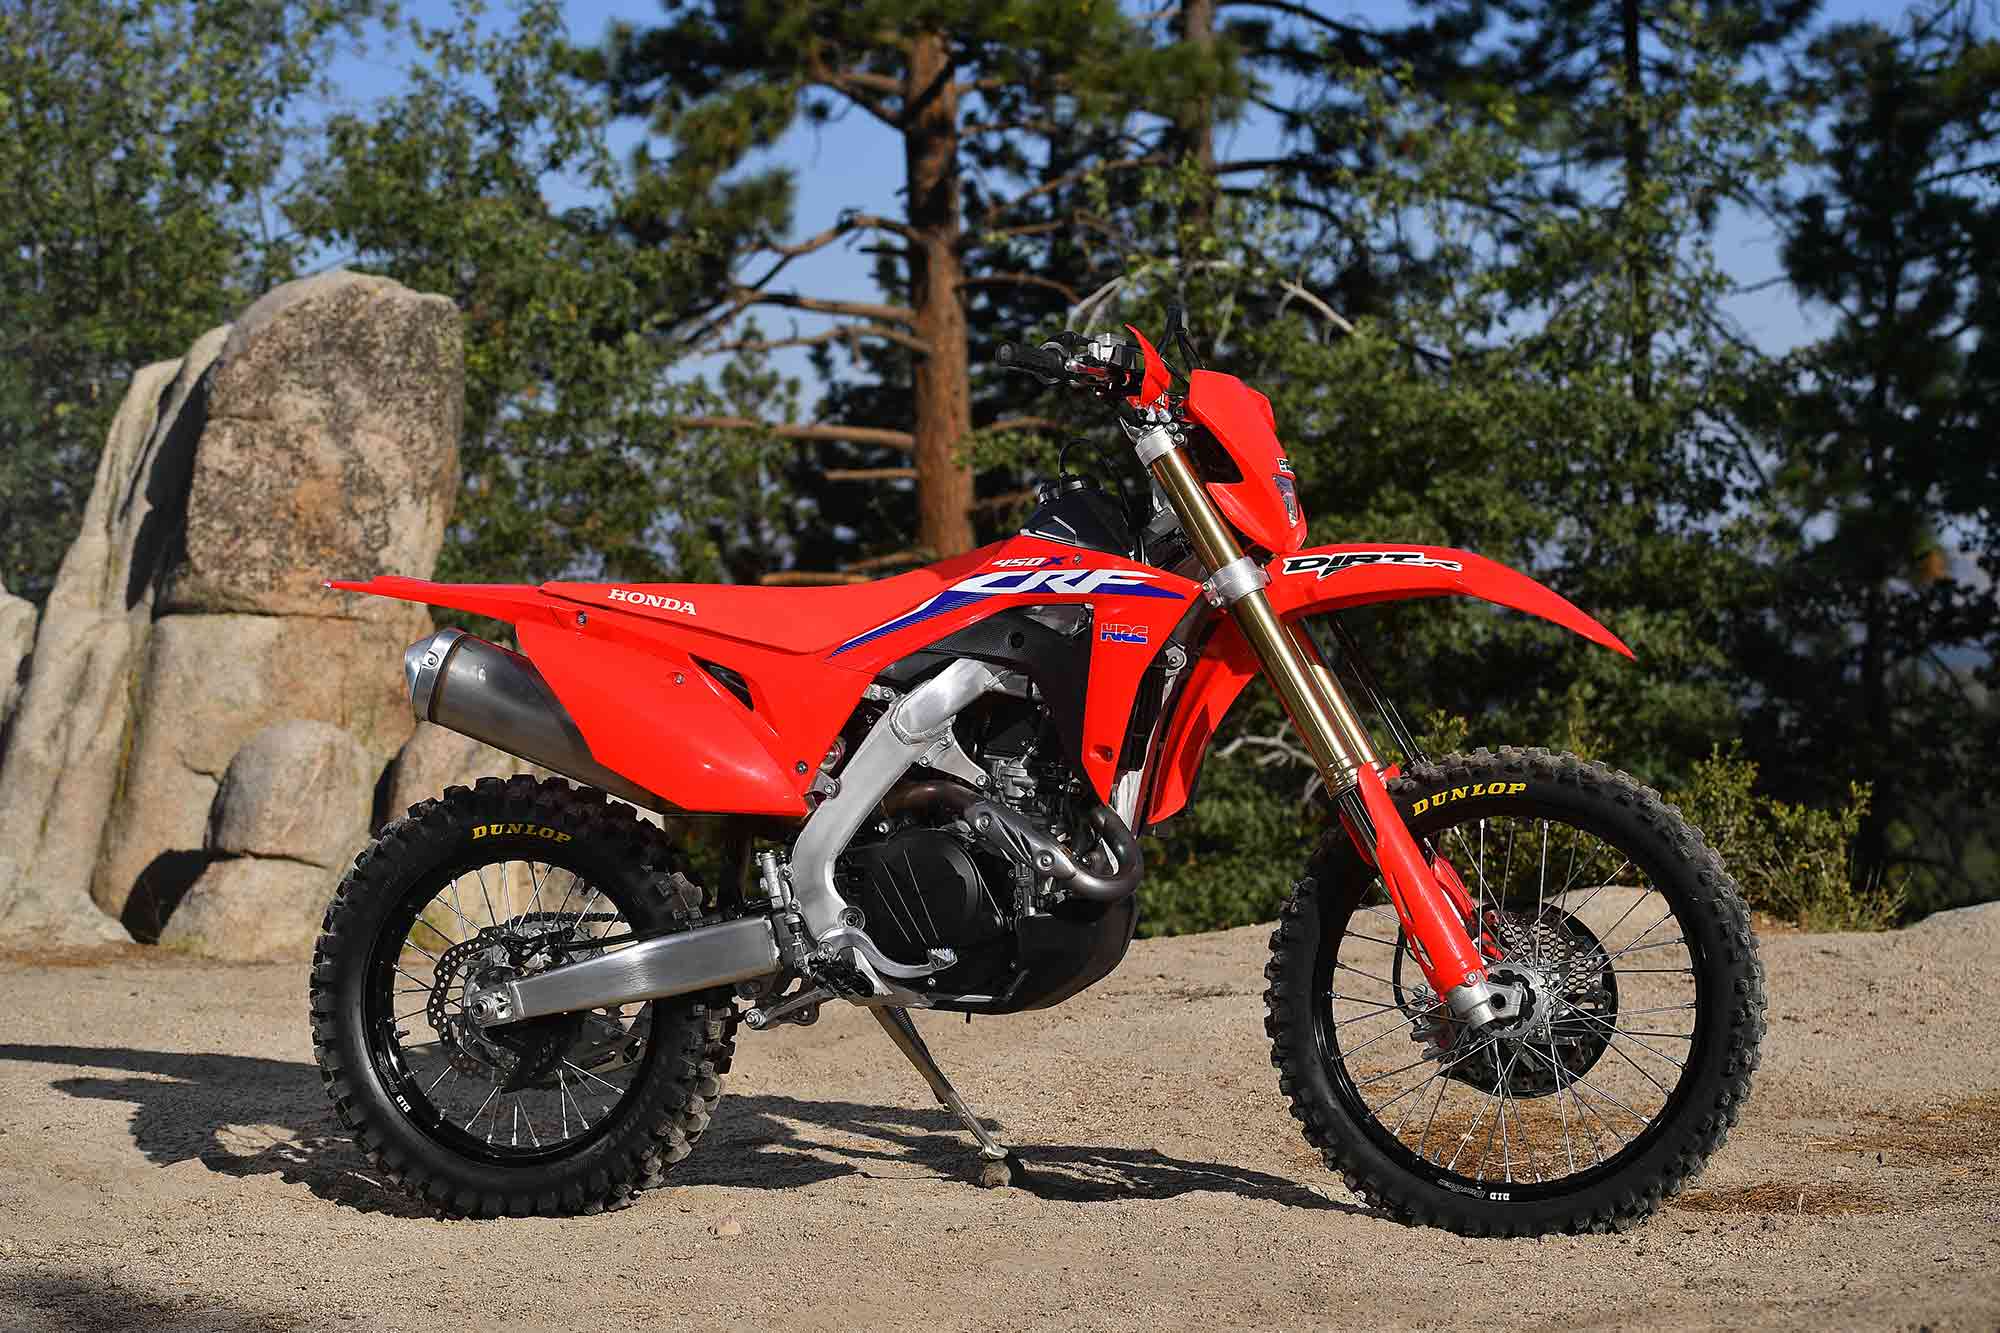 2. How to Convert Your Dirt Bike into a Street-Legal Motorcycle?